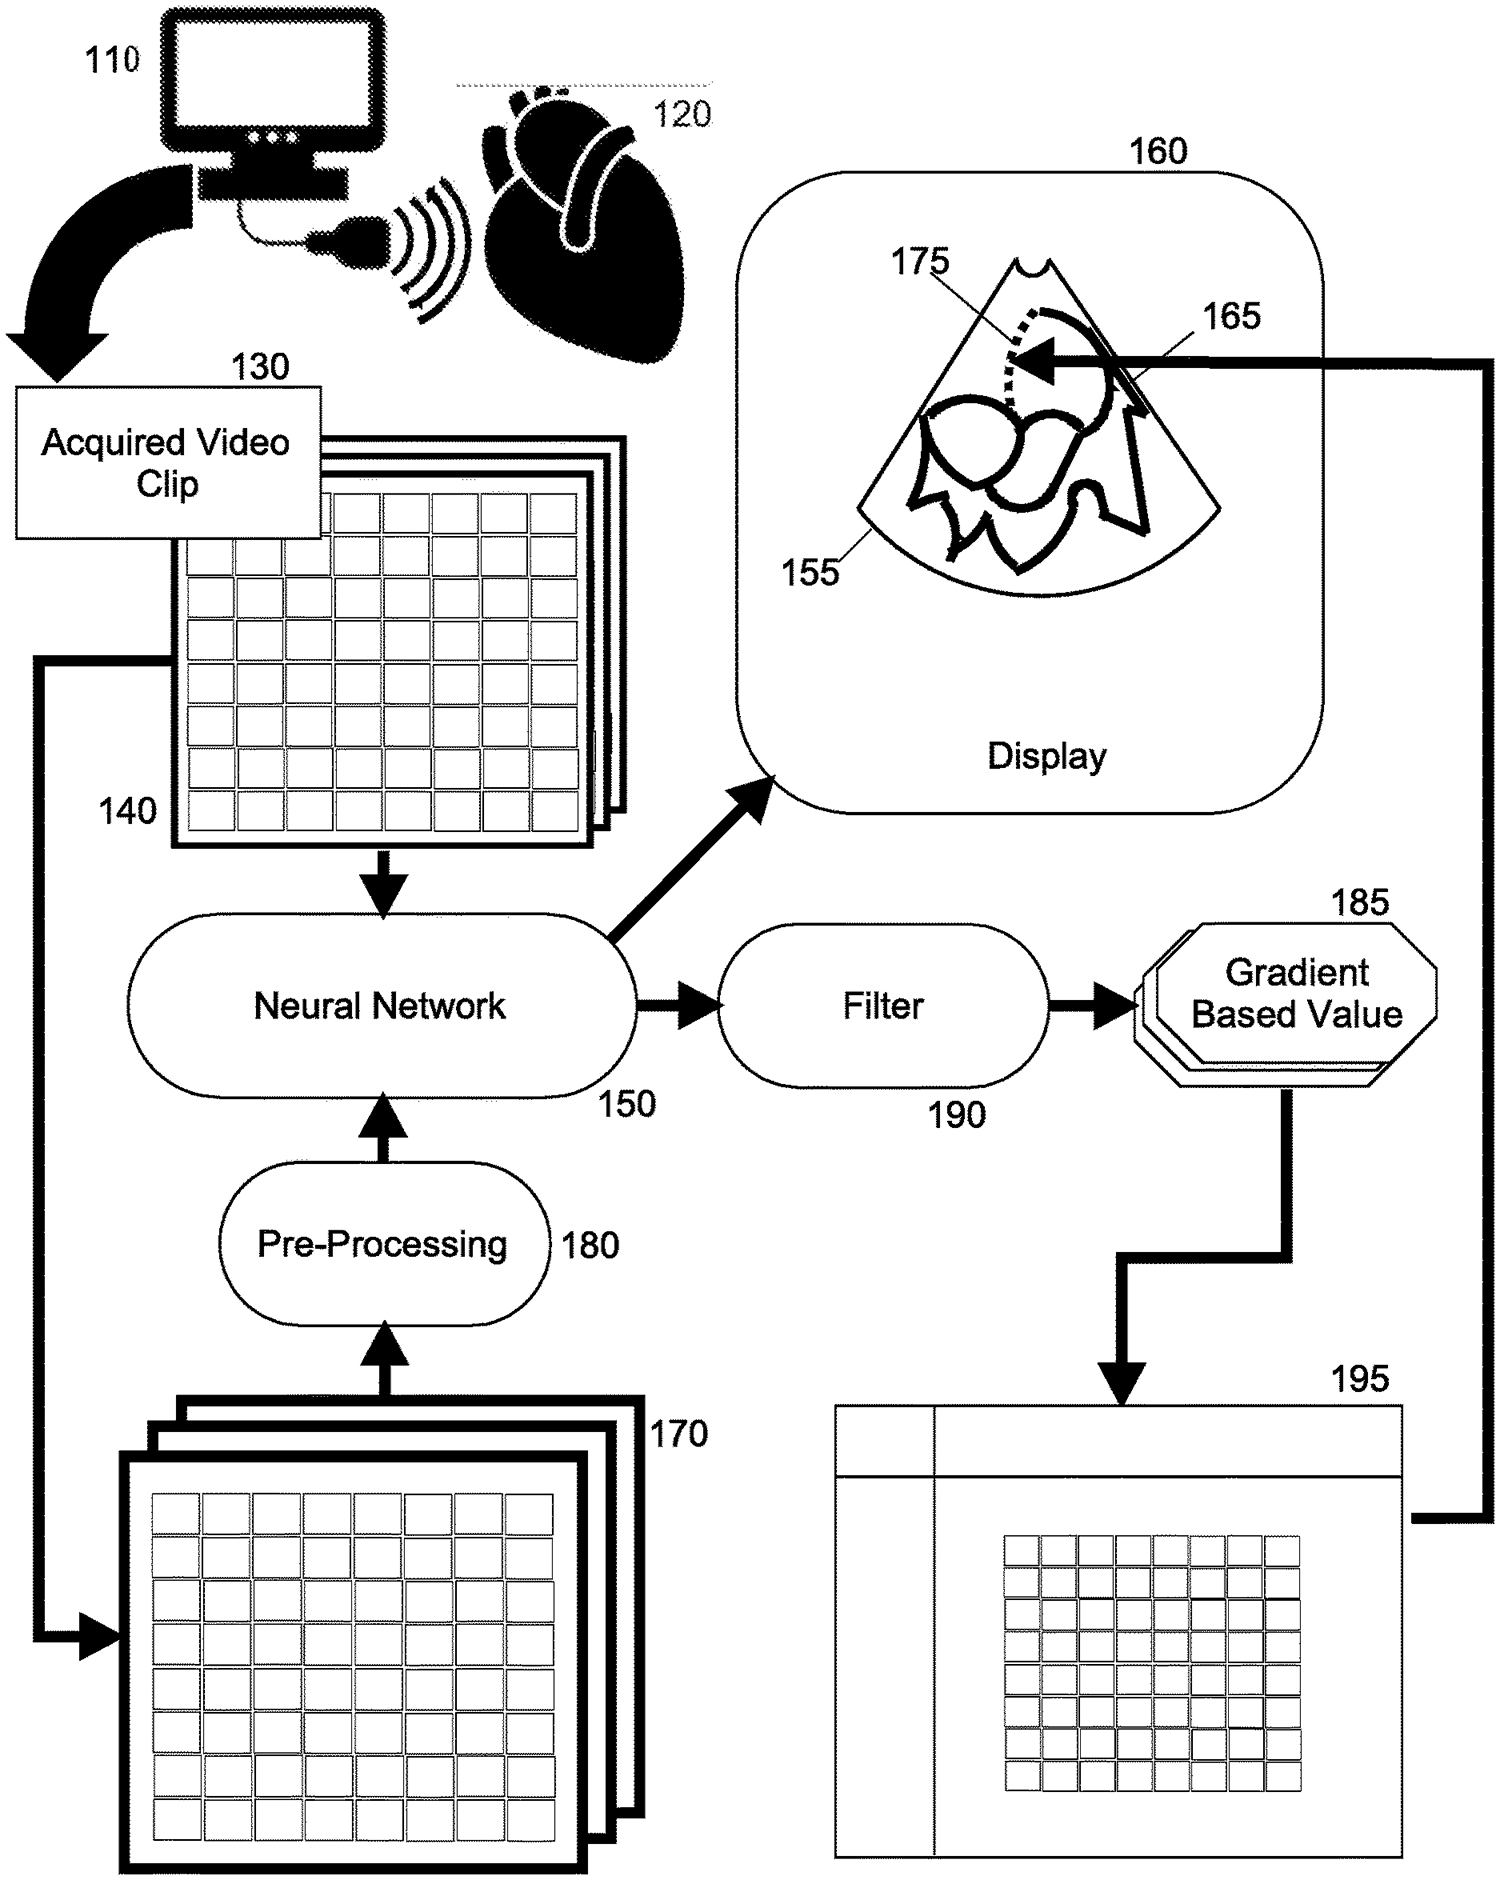 Patent drawing for a cardiac ultrasound AI system